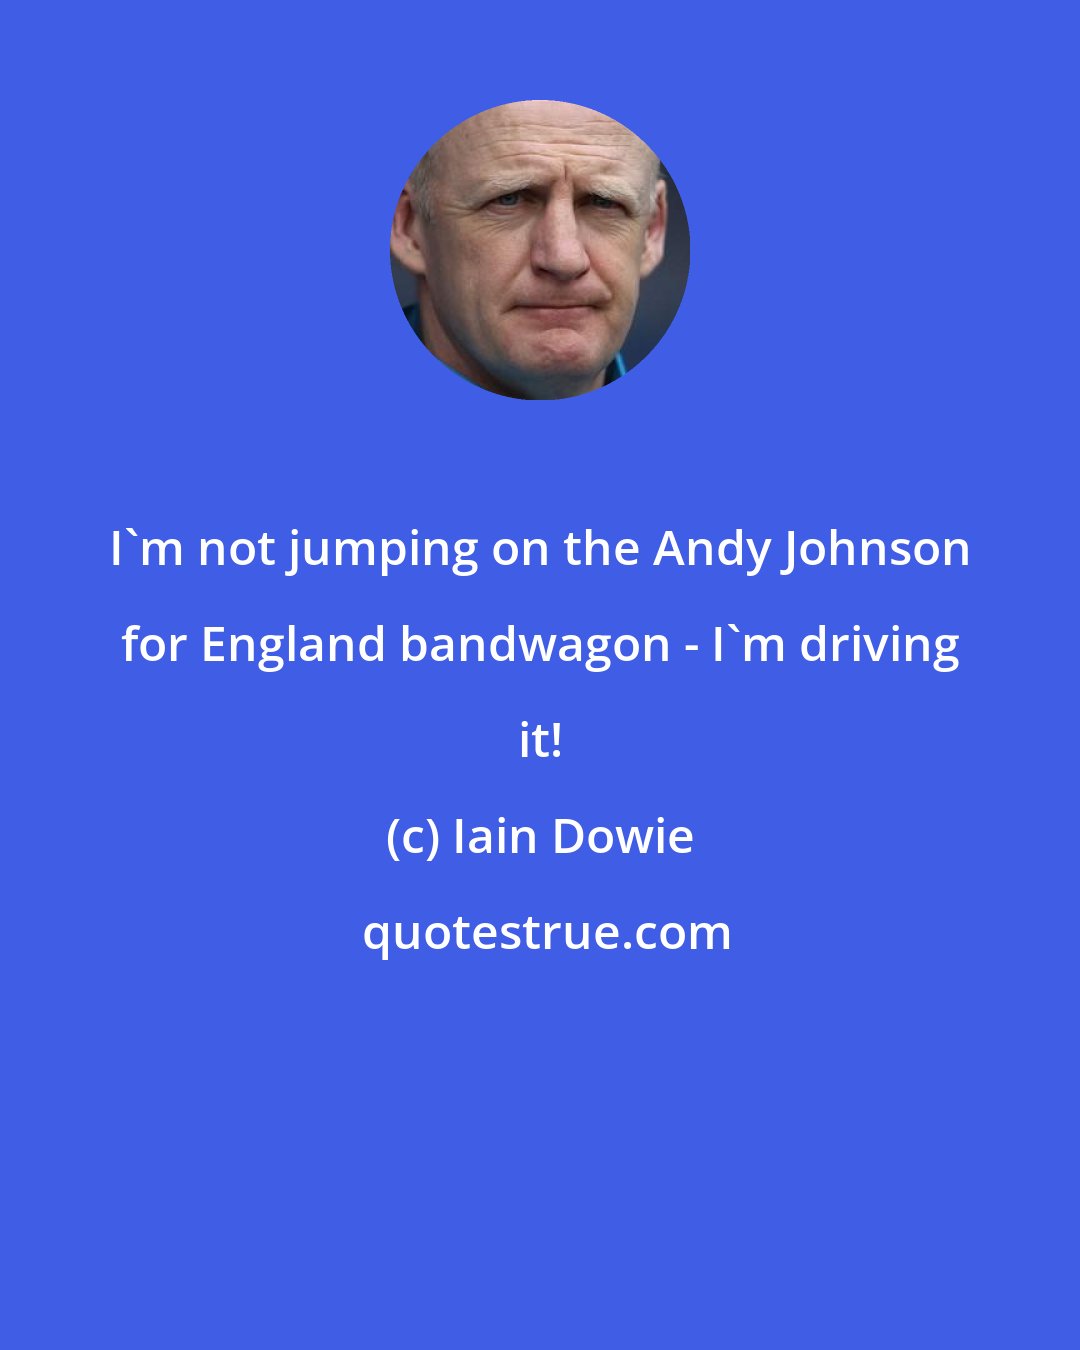 Iain Dowie: I'm not jumping on the Andy Johnson for England bandwagon - I'm driving it!